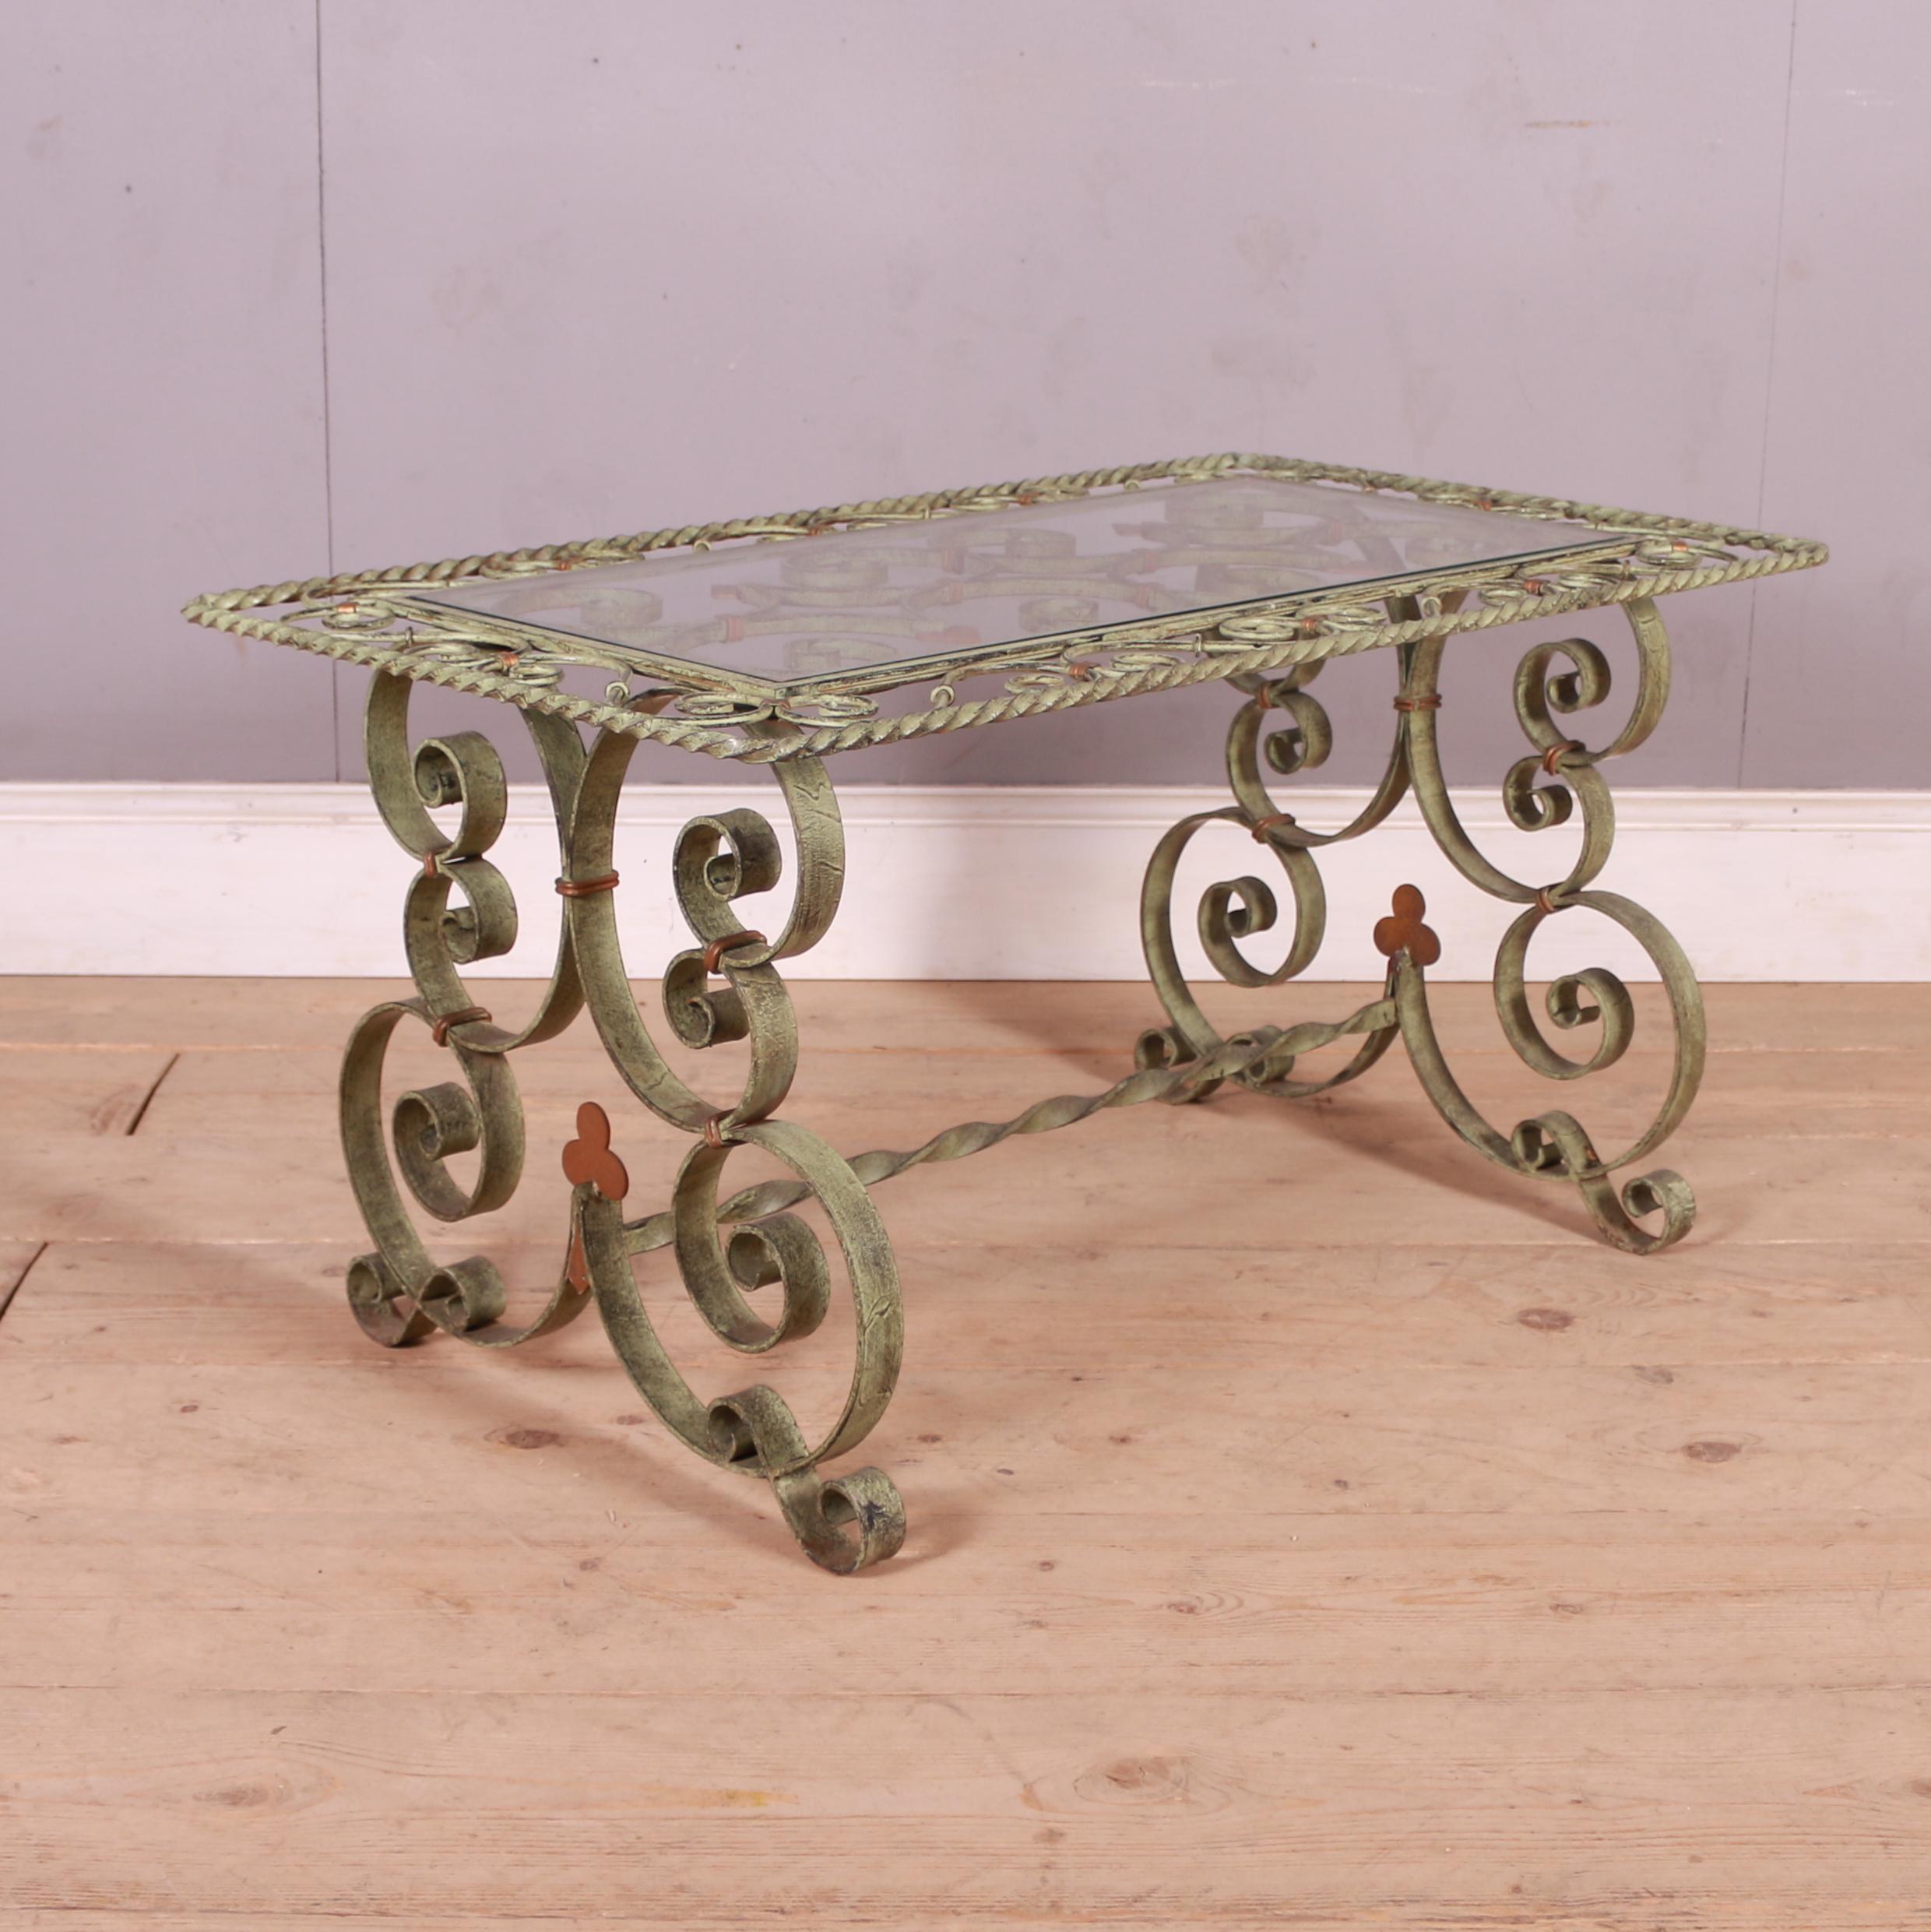 Decorative 20th C Spanish metal coffee table with glass insert.
The glass area is 75cm x 34cm.

Dimensions
38 inches (97 cms) wide
22 inches (56 cms) deep
19.5 inches (50 cms) high.

    